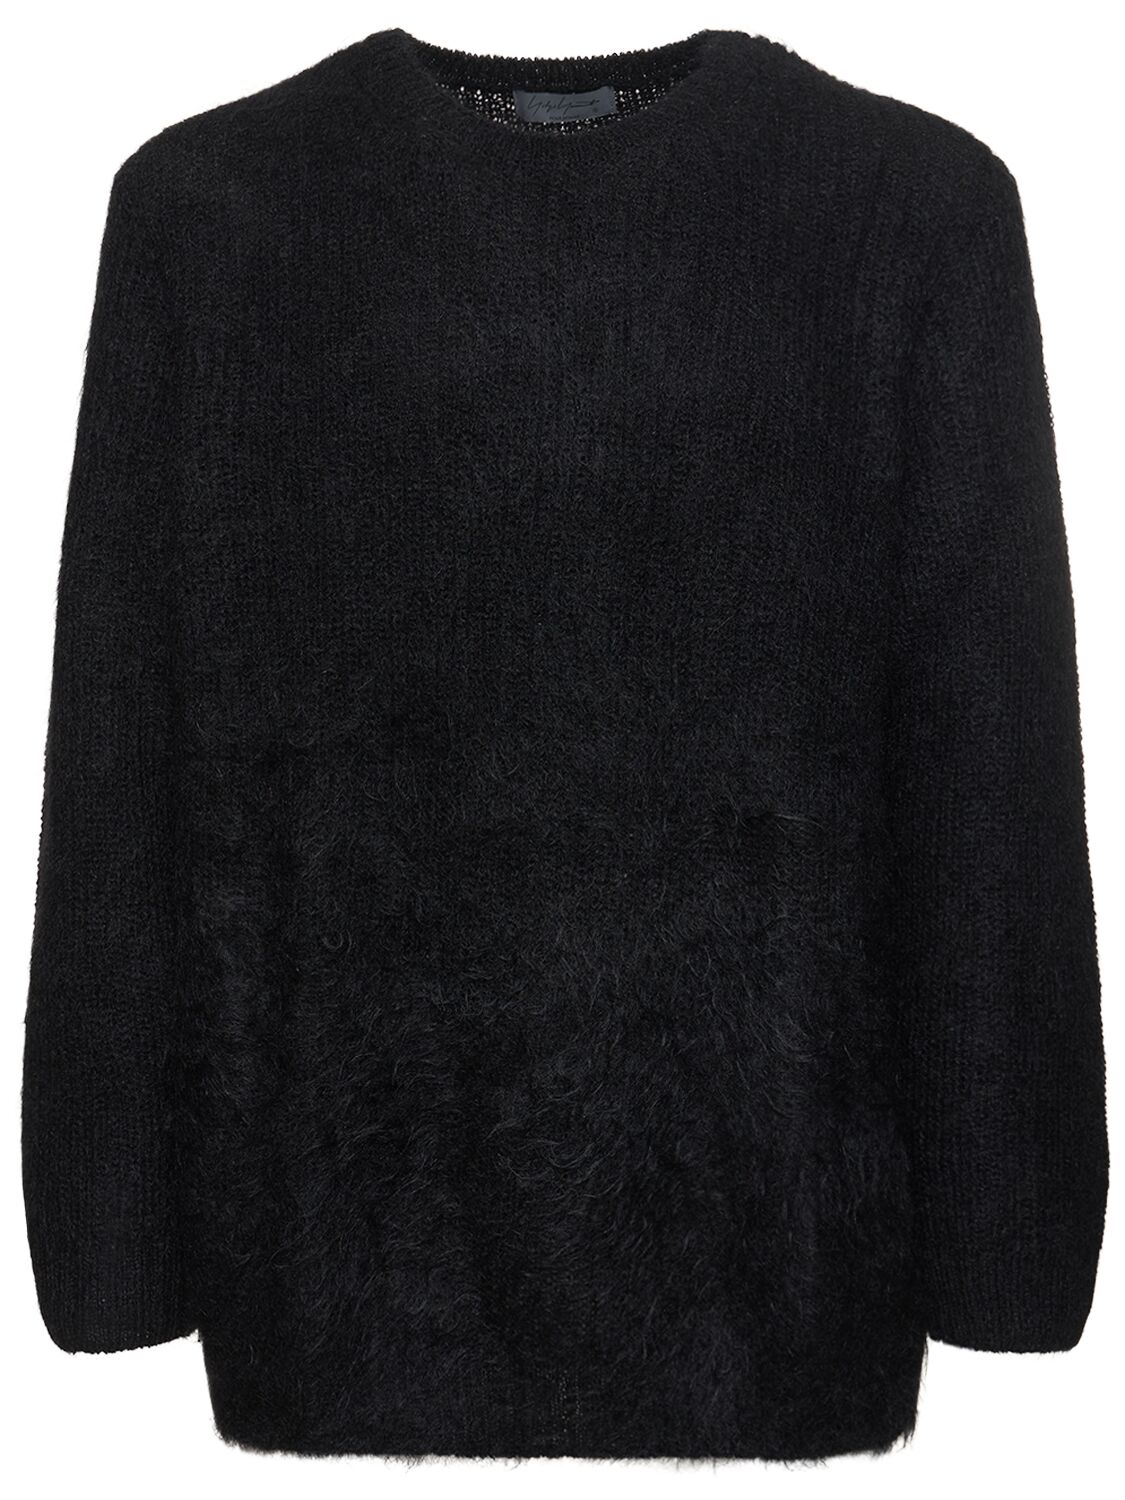 Image of Brushed Mohair Blend Crewneck Sweater